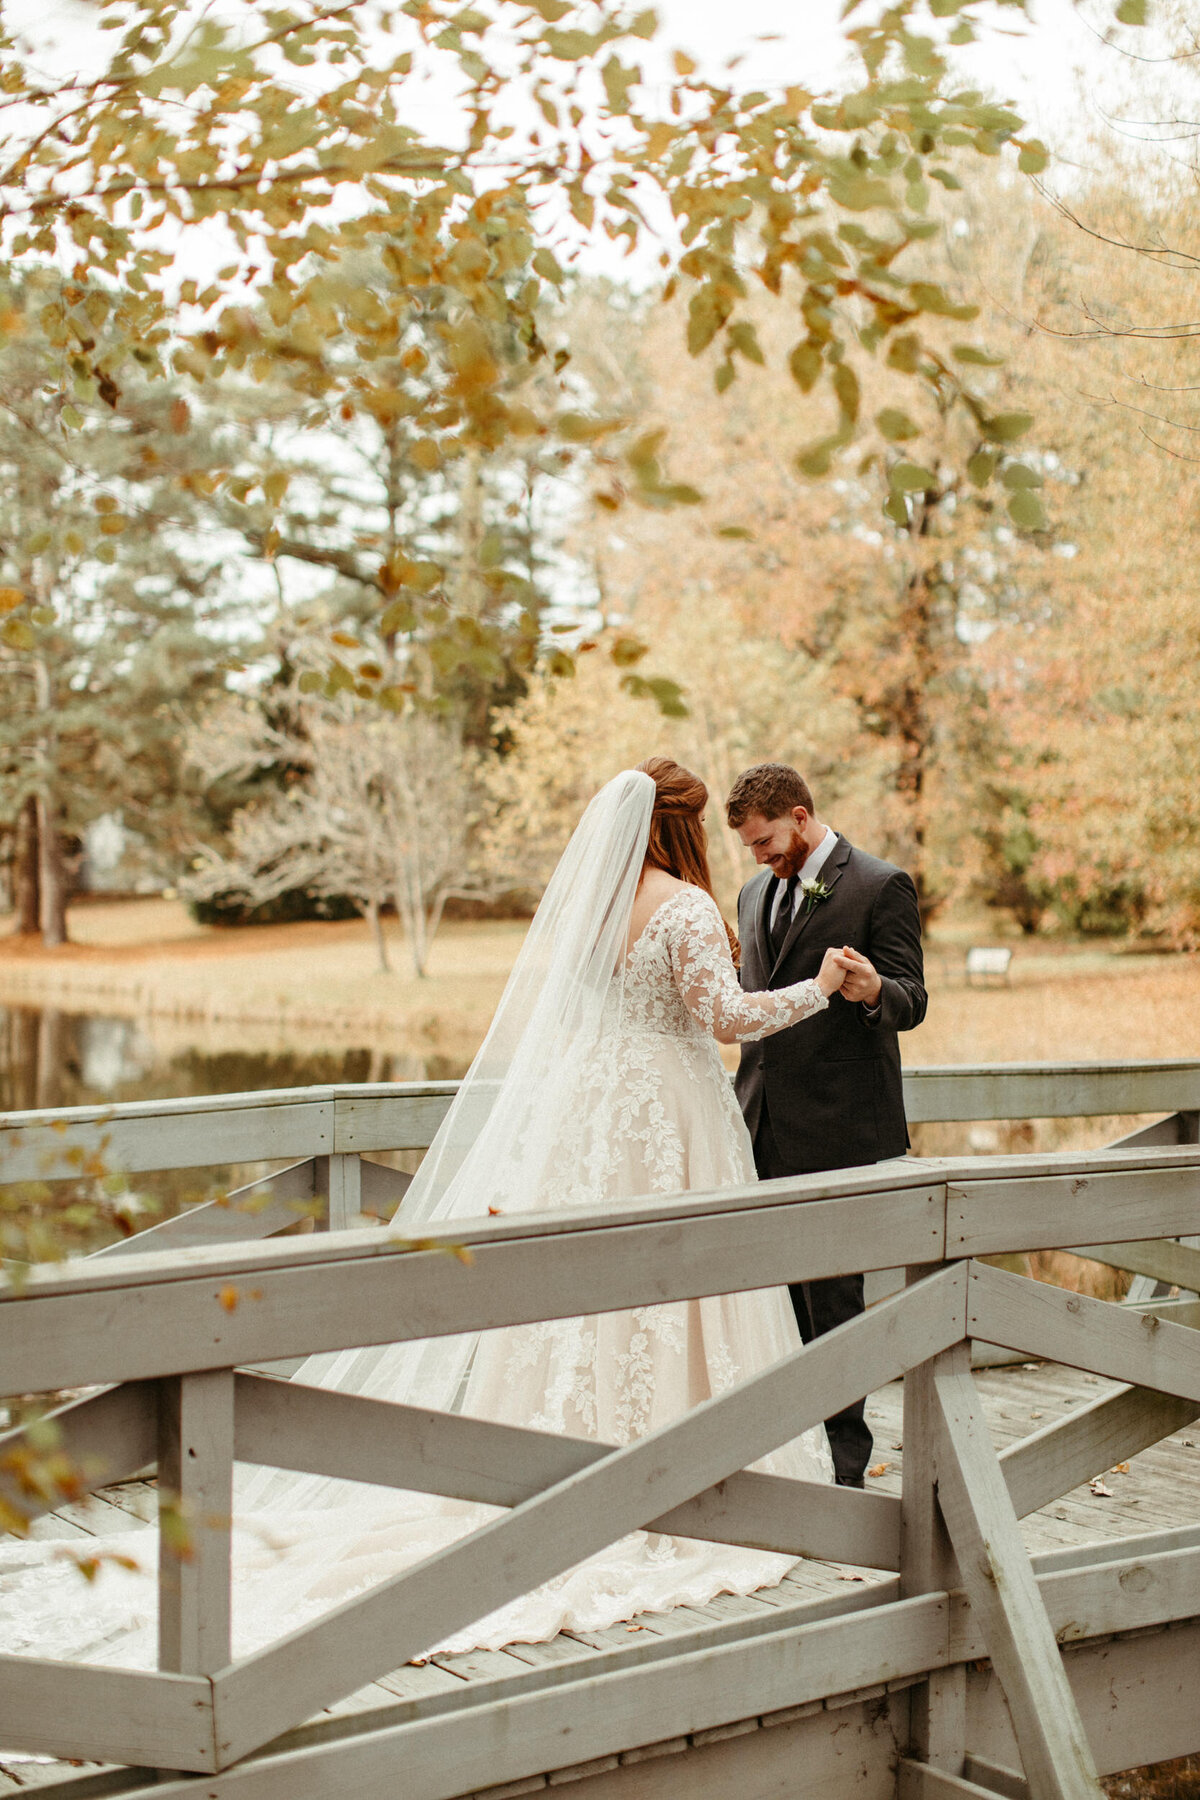 Groom excited to see his bride on a bridge over a pond with tree branches hanging over them on a fall ay